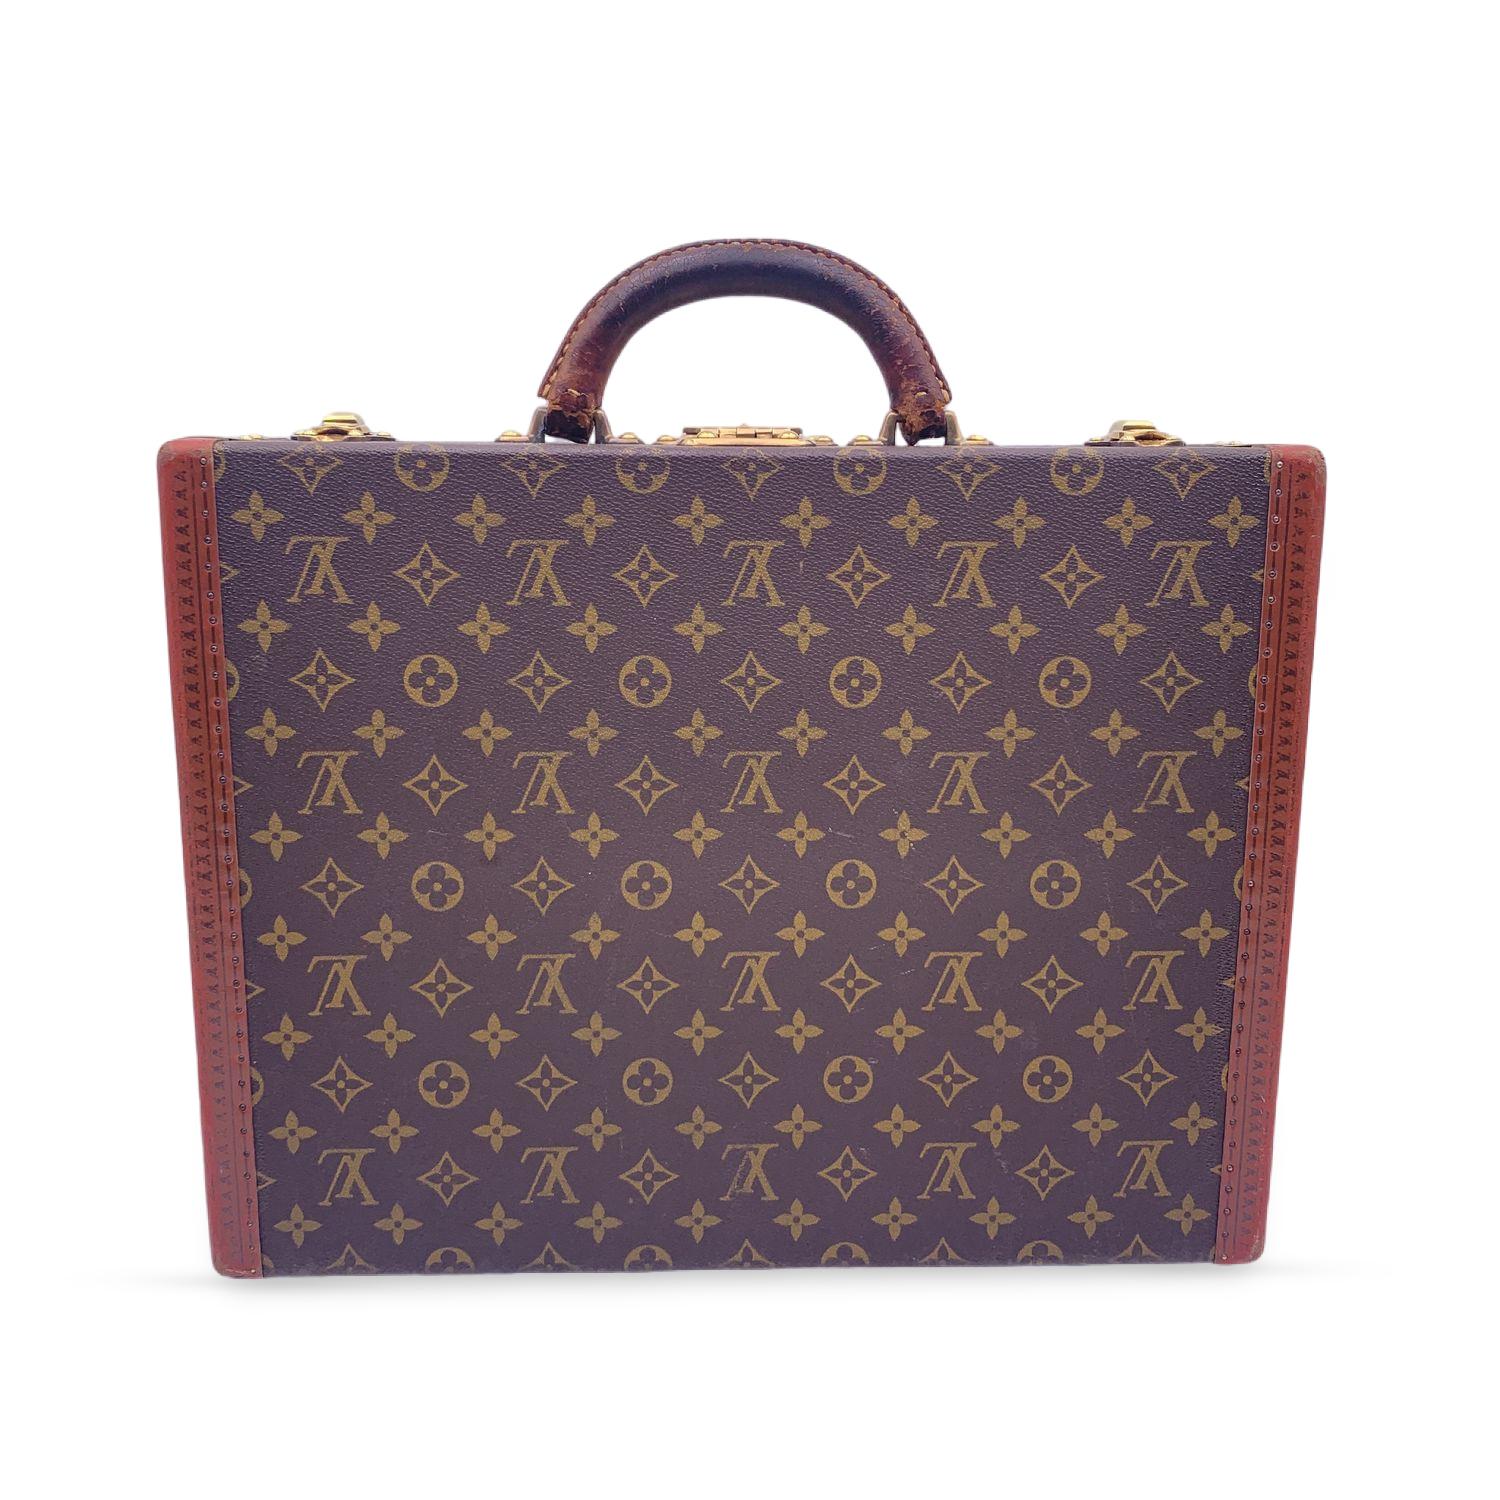 Gorgeous vintage Louis Vuitton 'President' hard-side briefcase in timeless monogram canvas with genuine leather handle. Monogram canvas. LV monograms embossed on trim. Rounded leather handle. Canvas interior with 1 side leather strap with buckle.